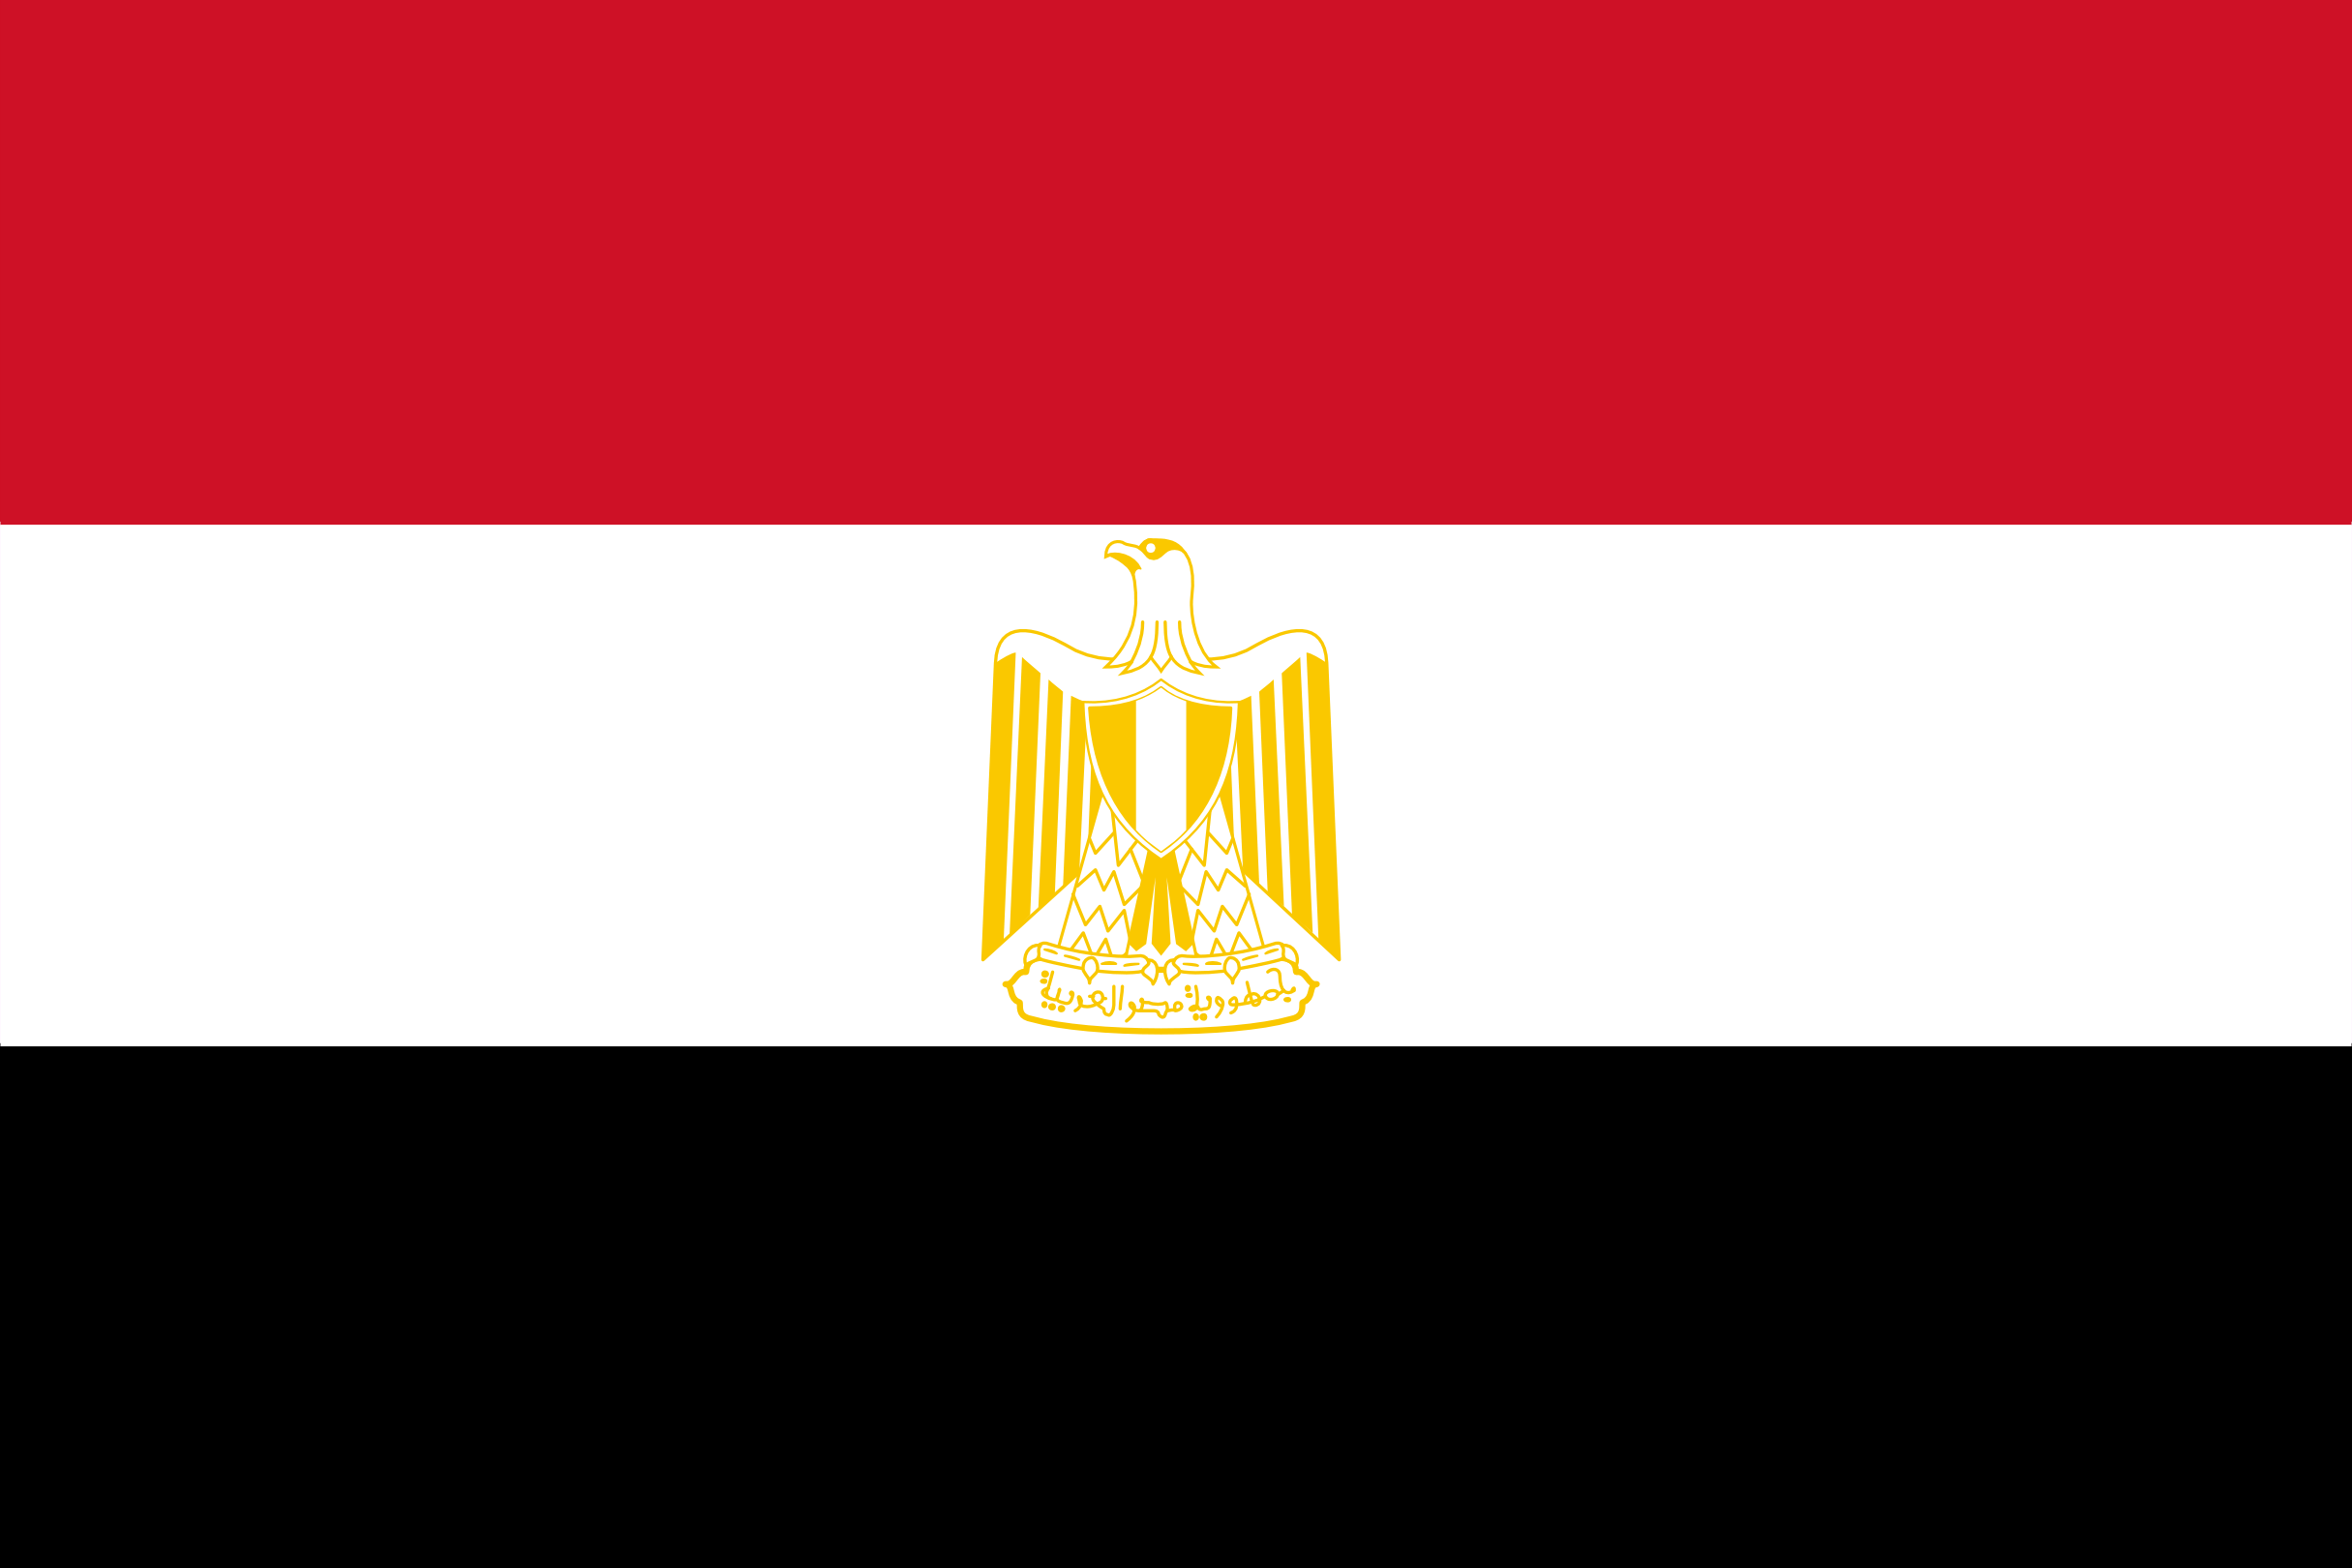 the image shows the egyptian flag